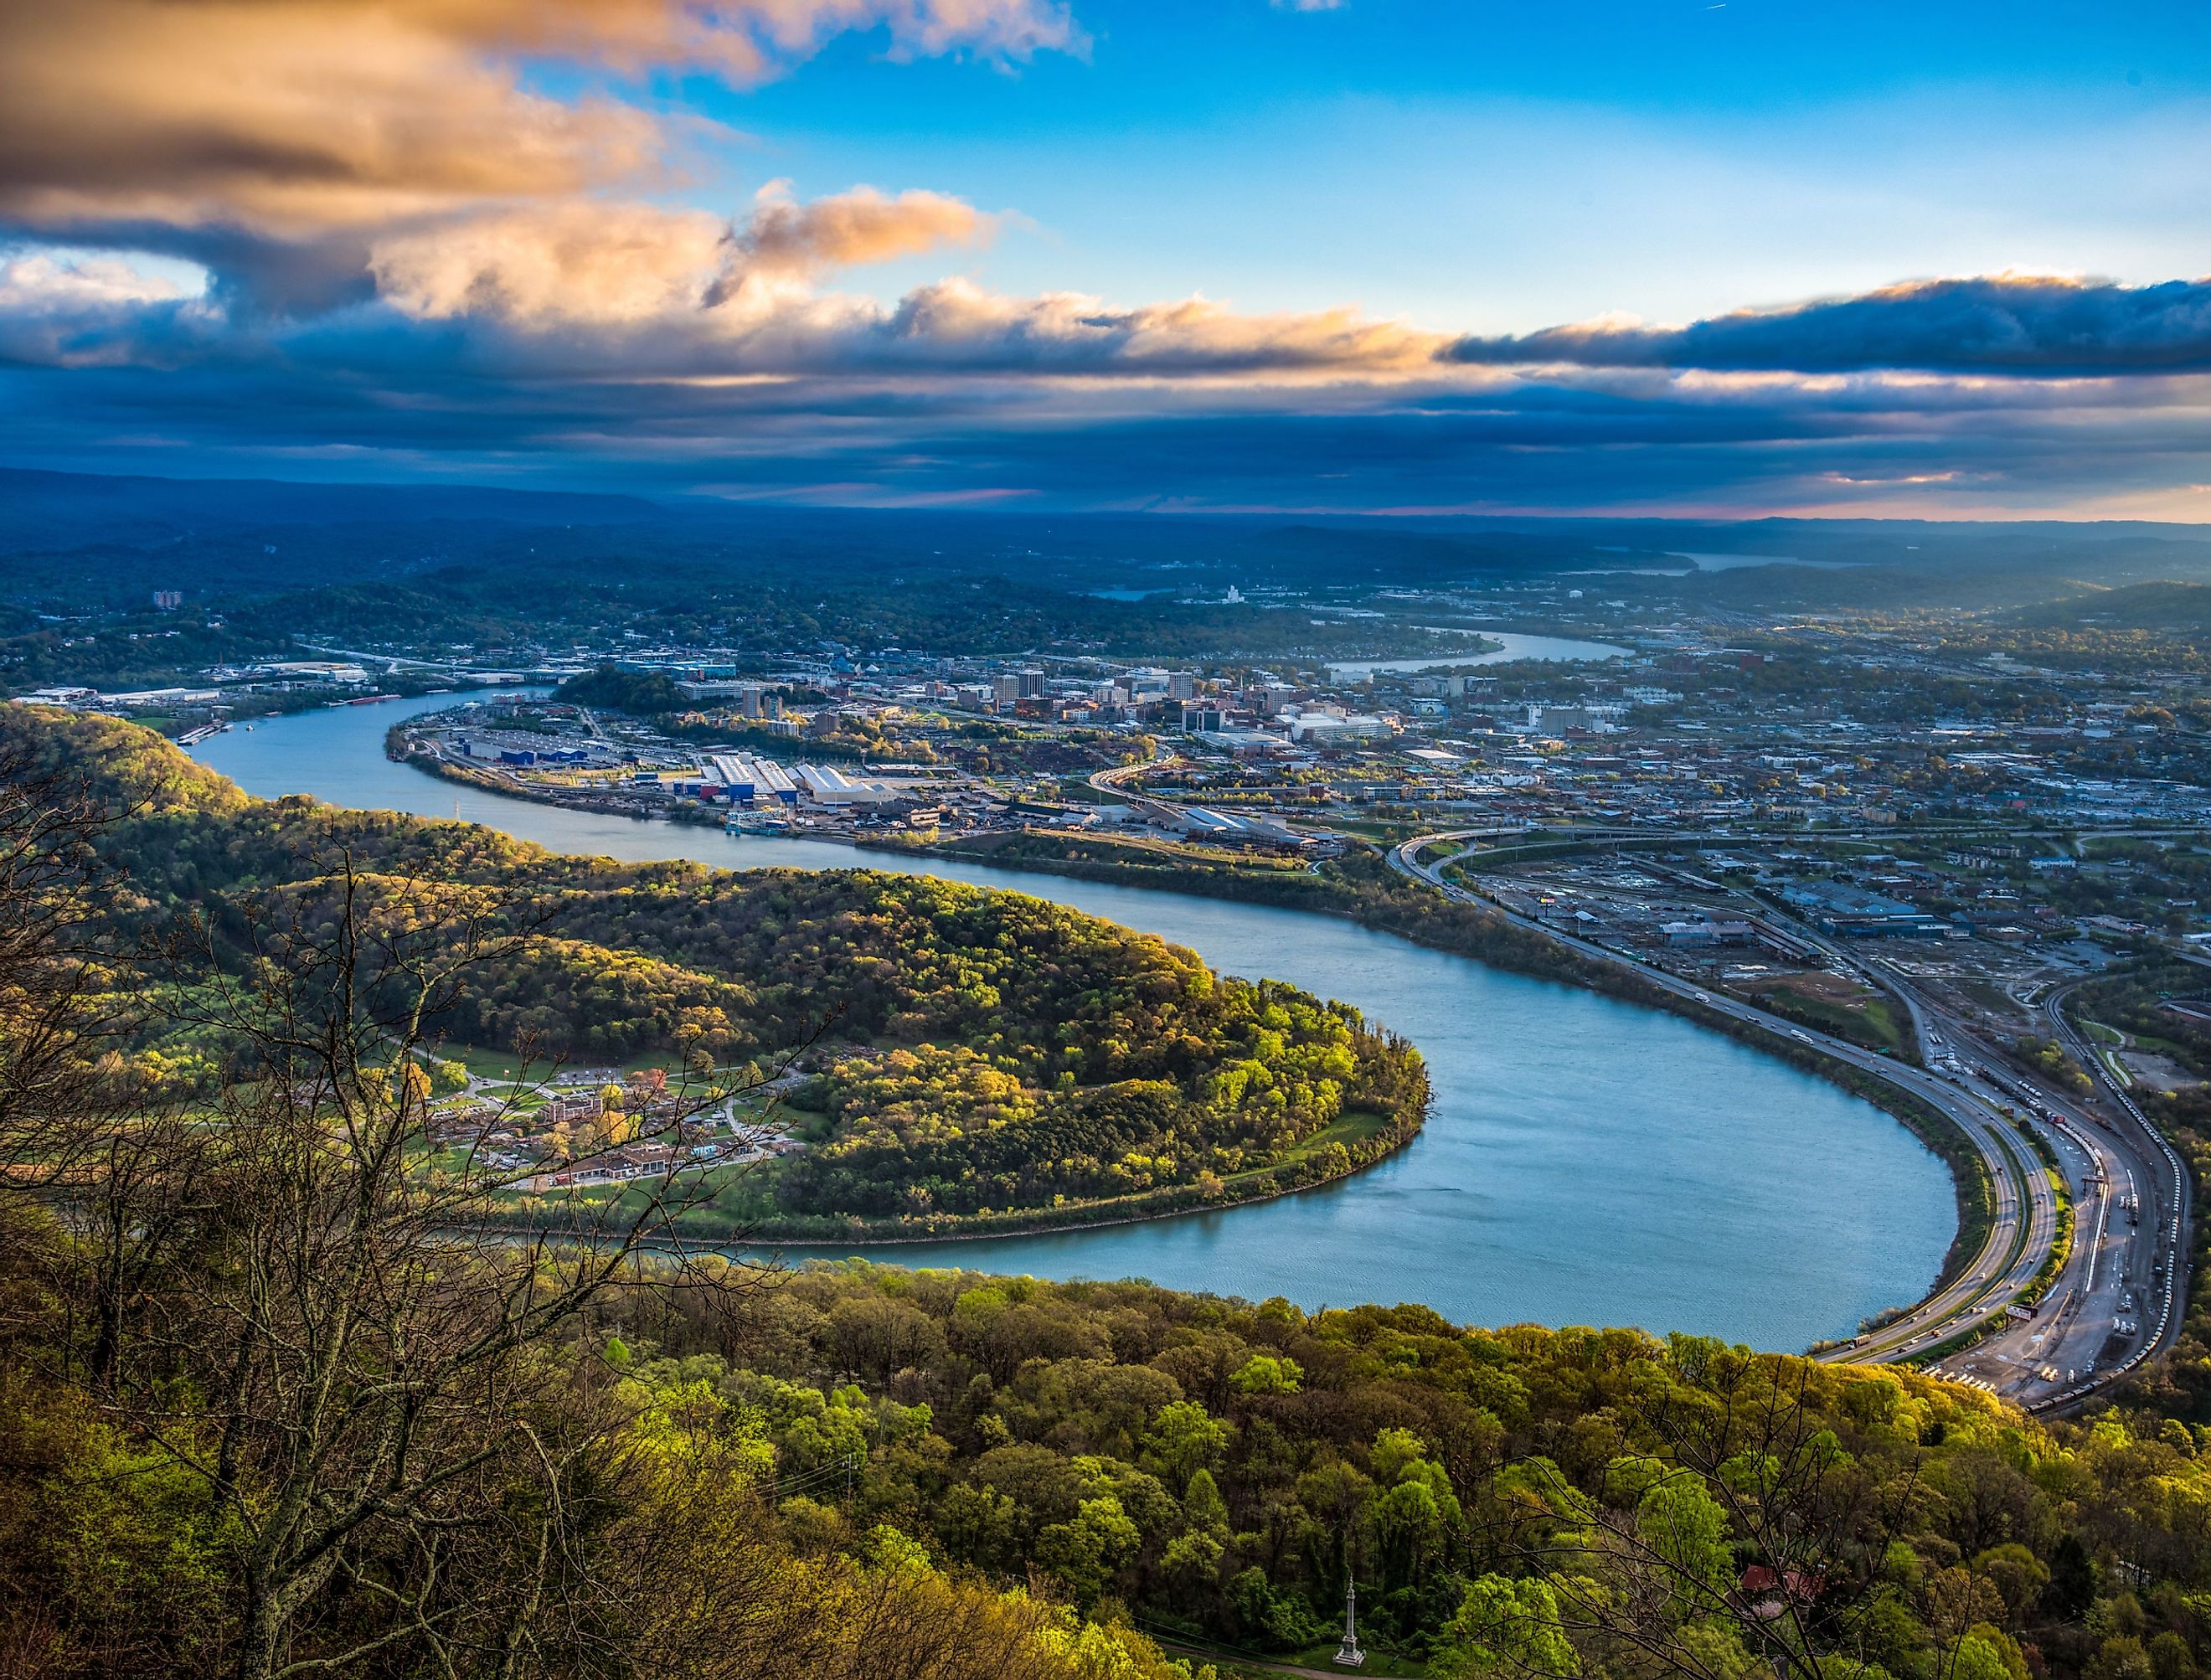 Aerial View of Downtown Chattanooga Tennessee and Tennessee River. Image credit Kevin Ruck via shutterstock